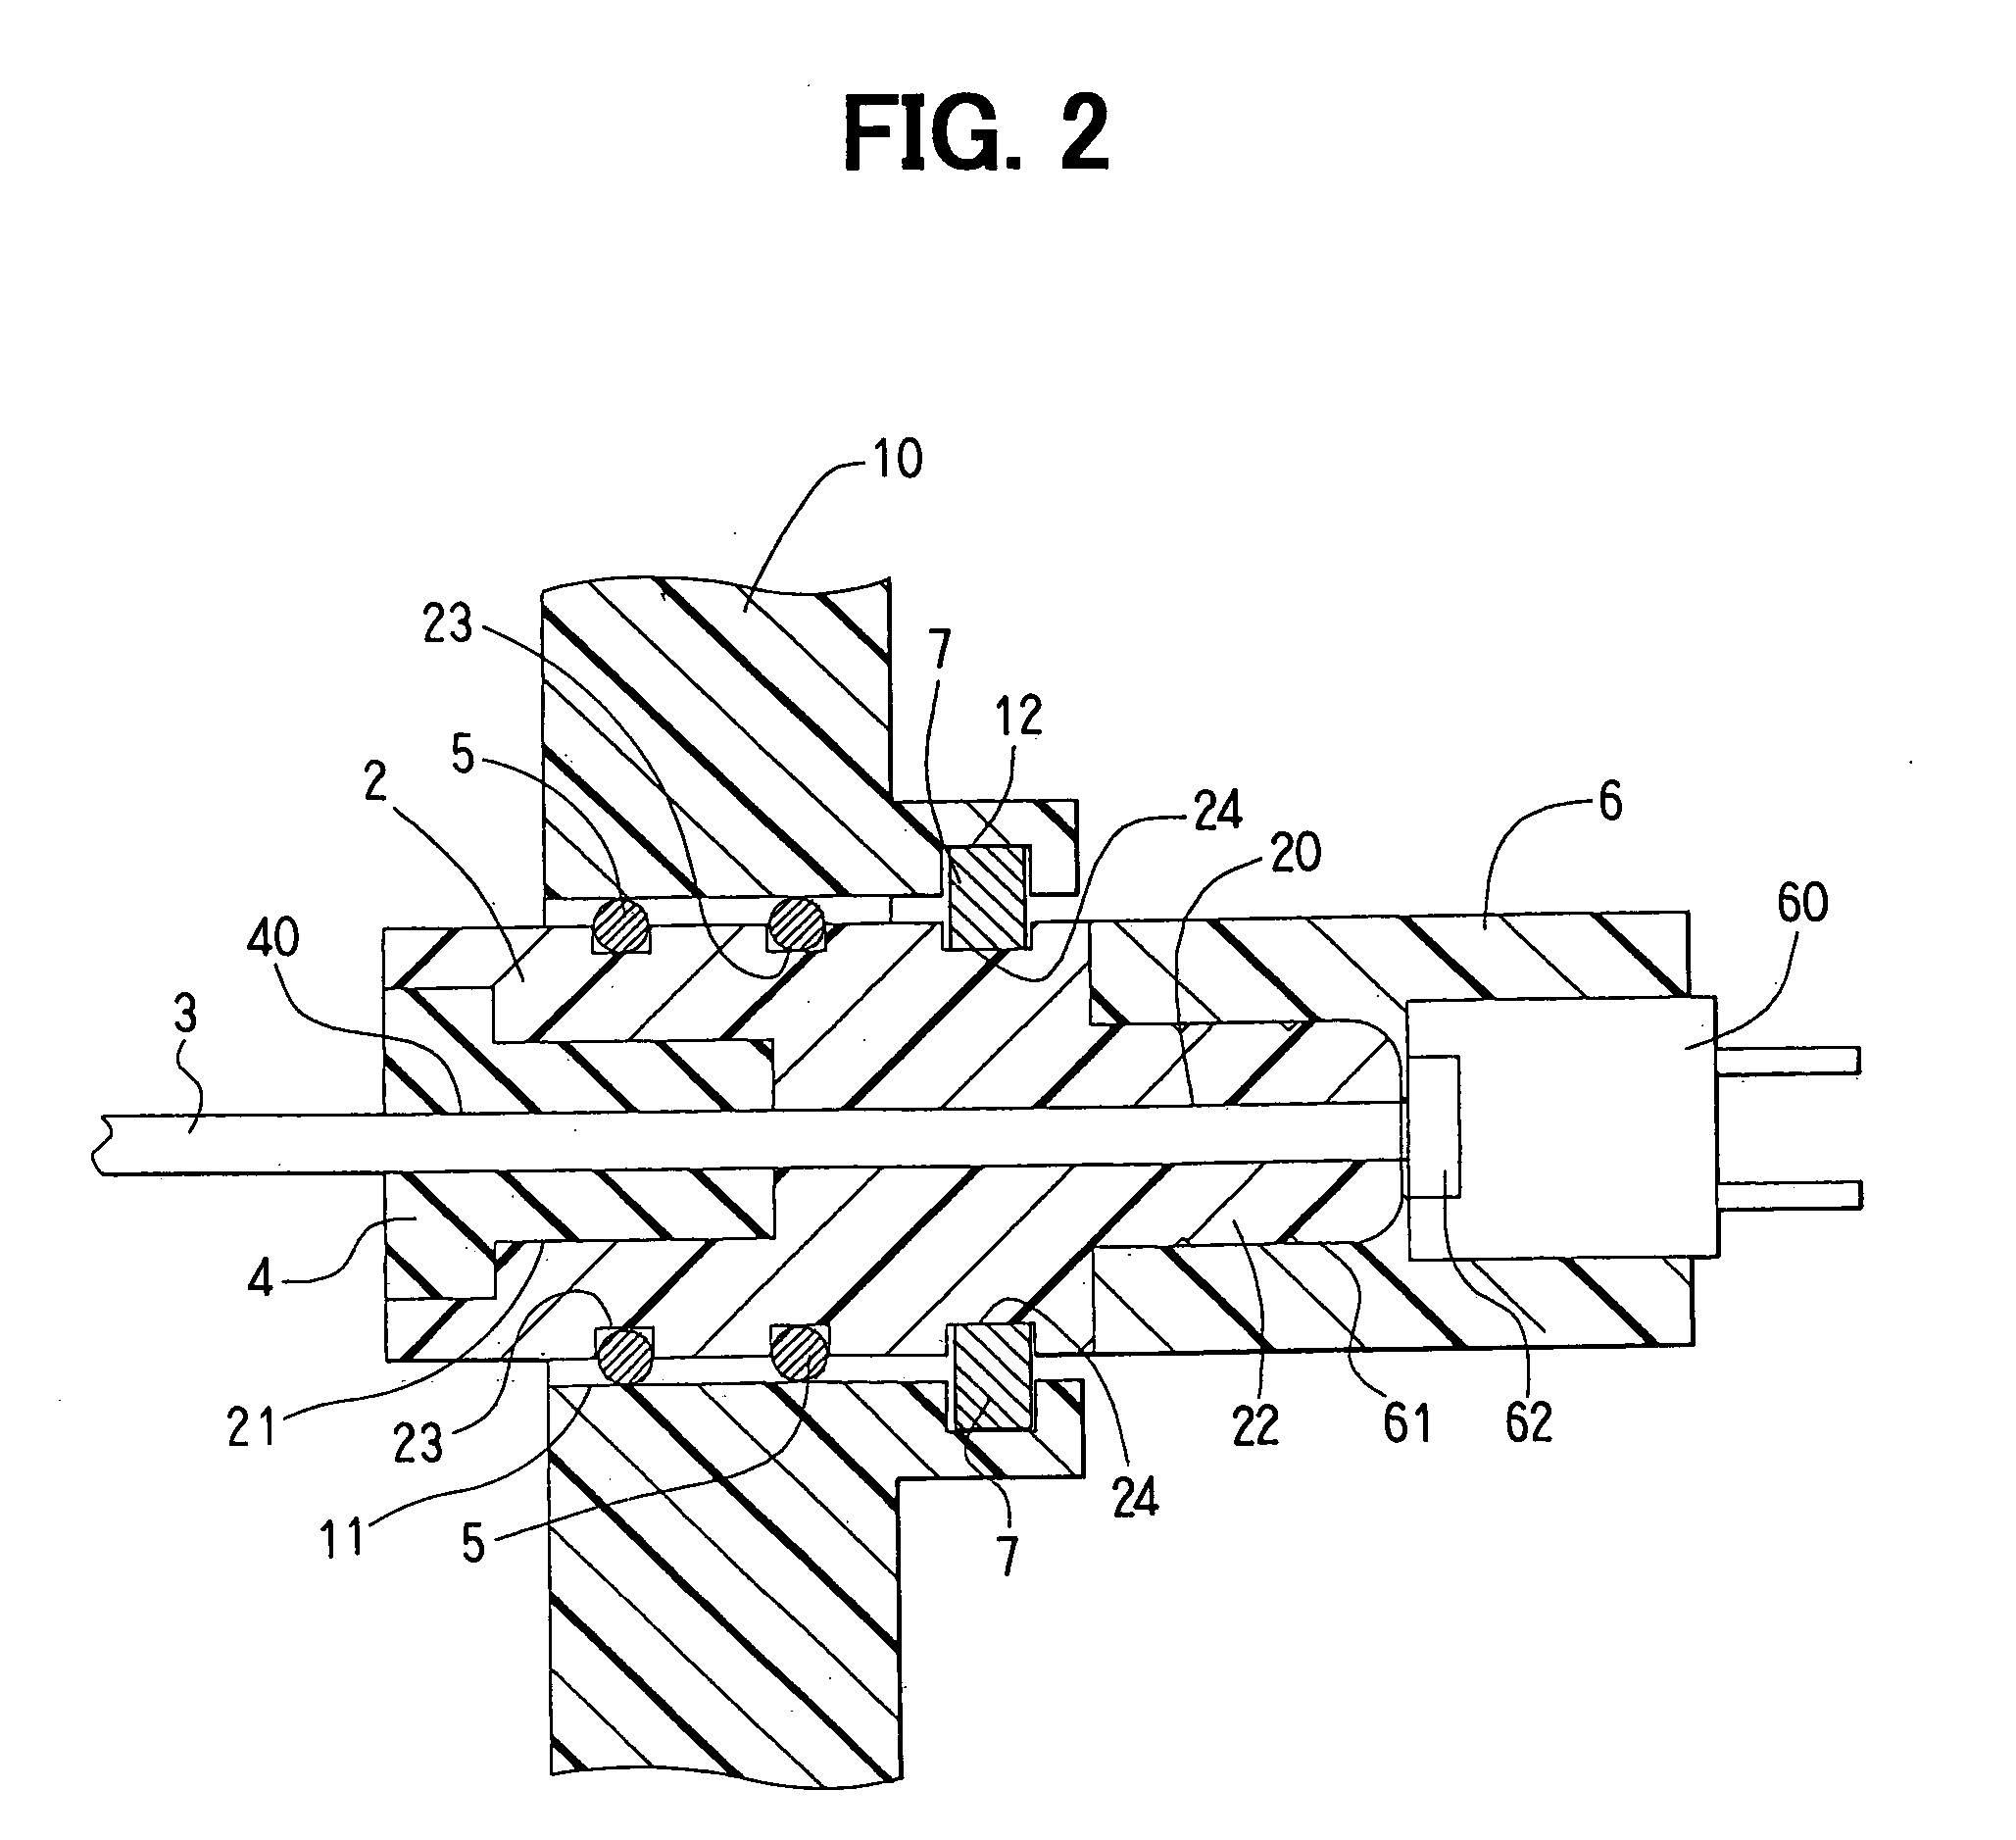 Structure for connecting optical fiber